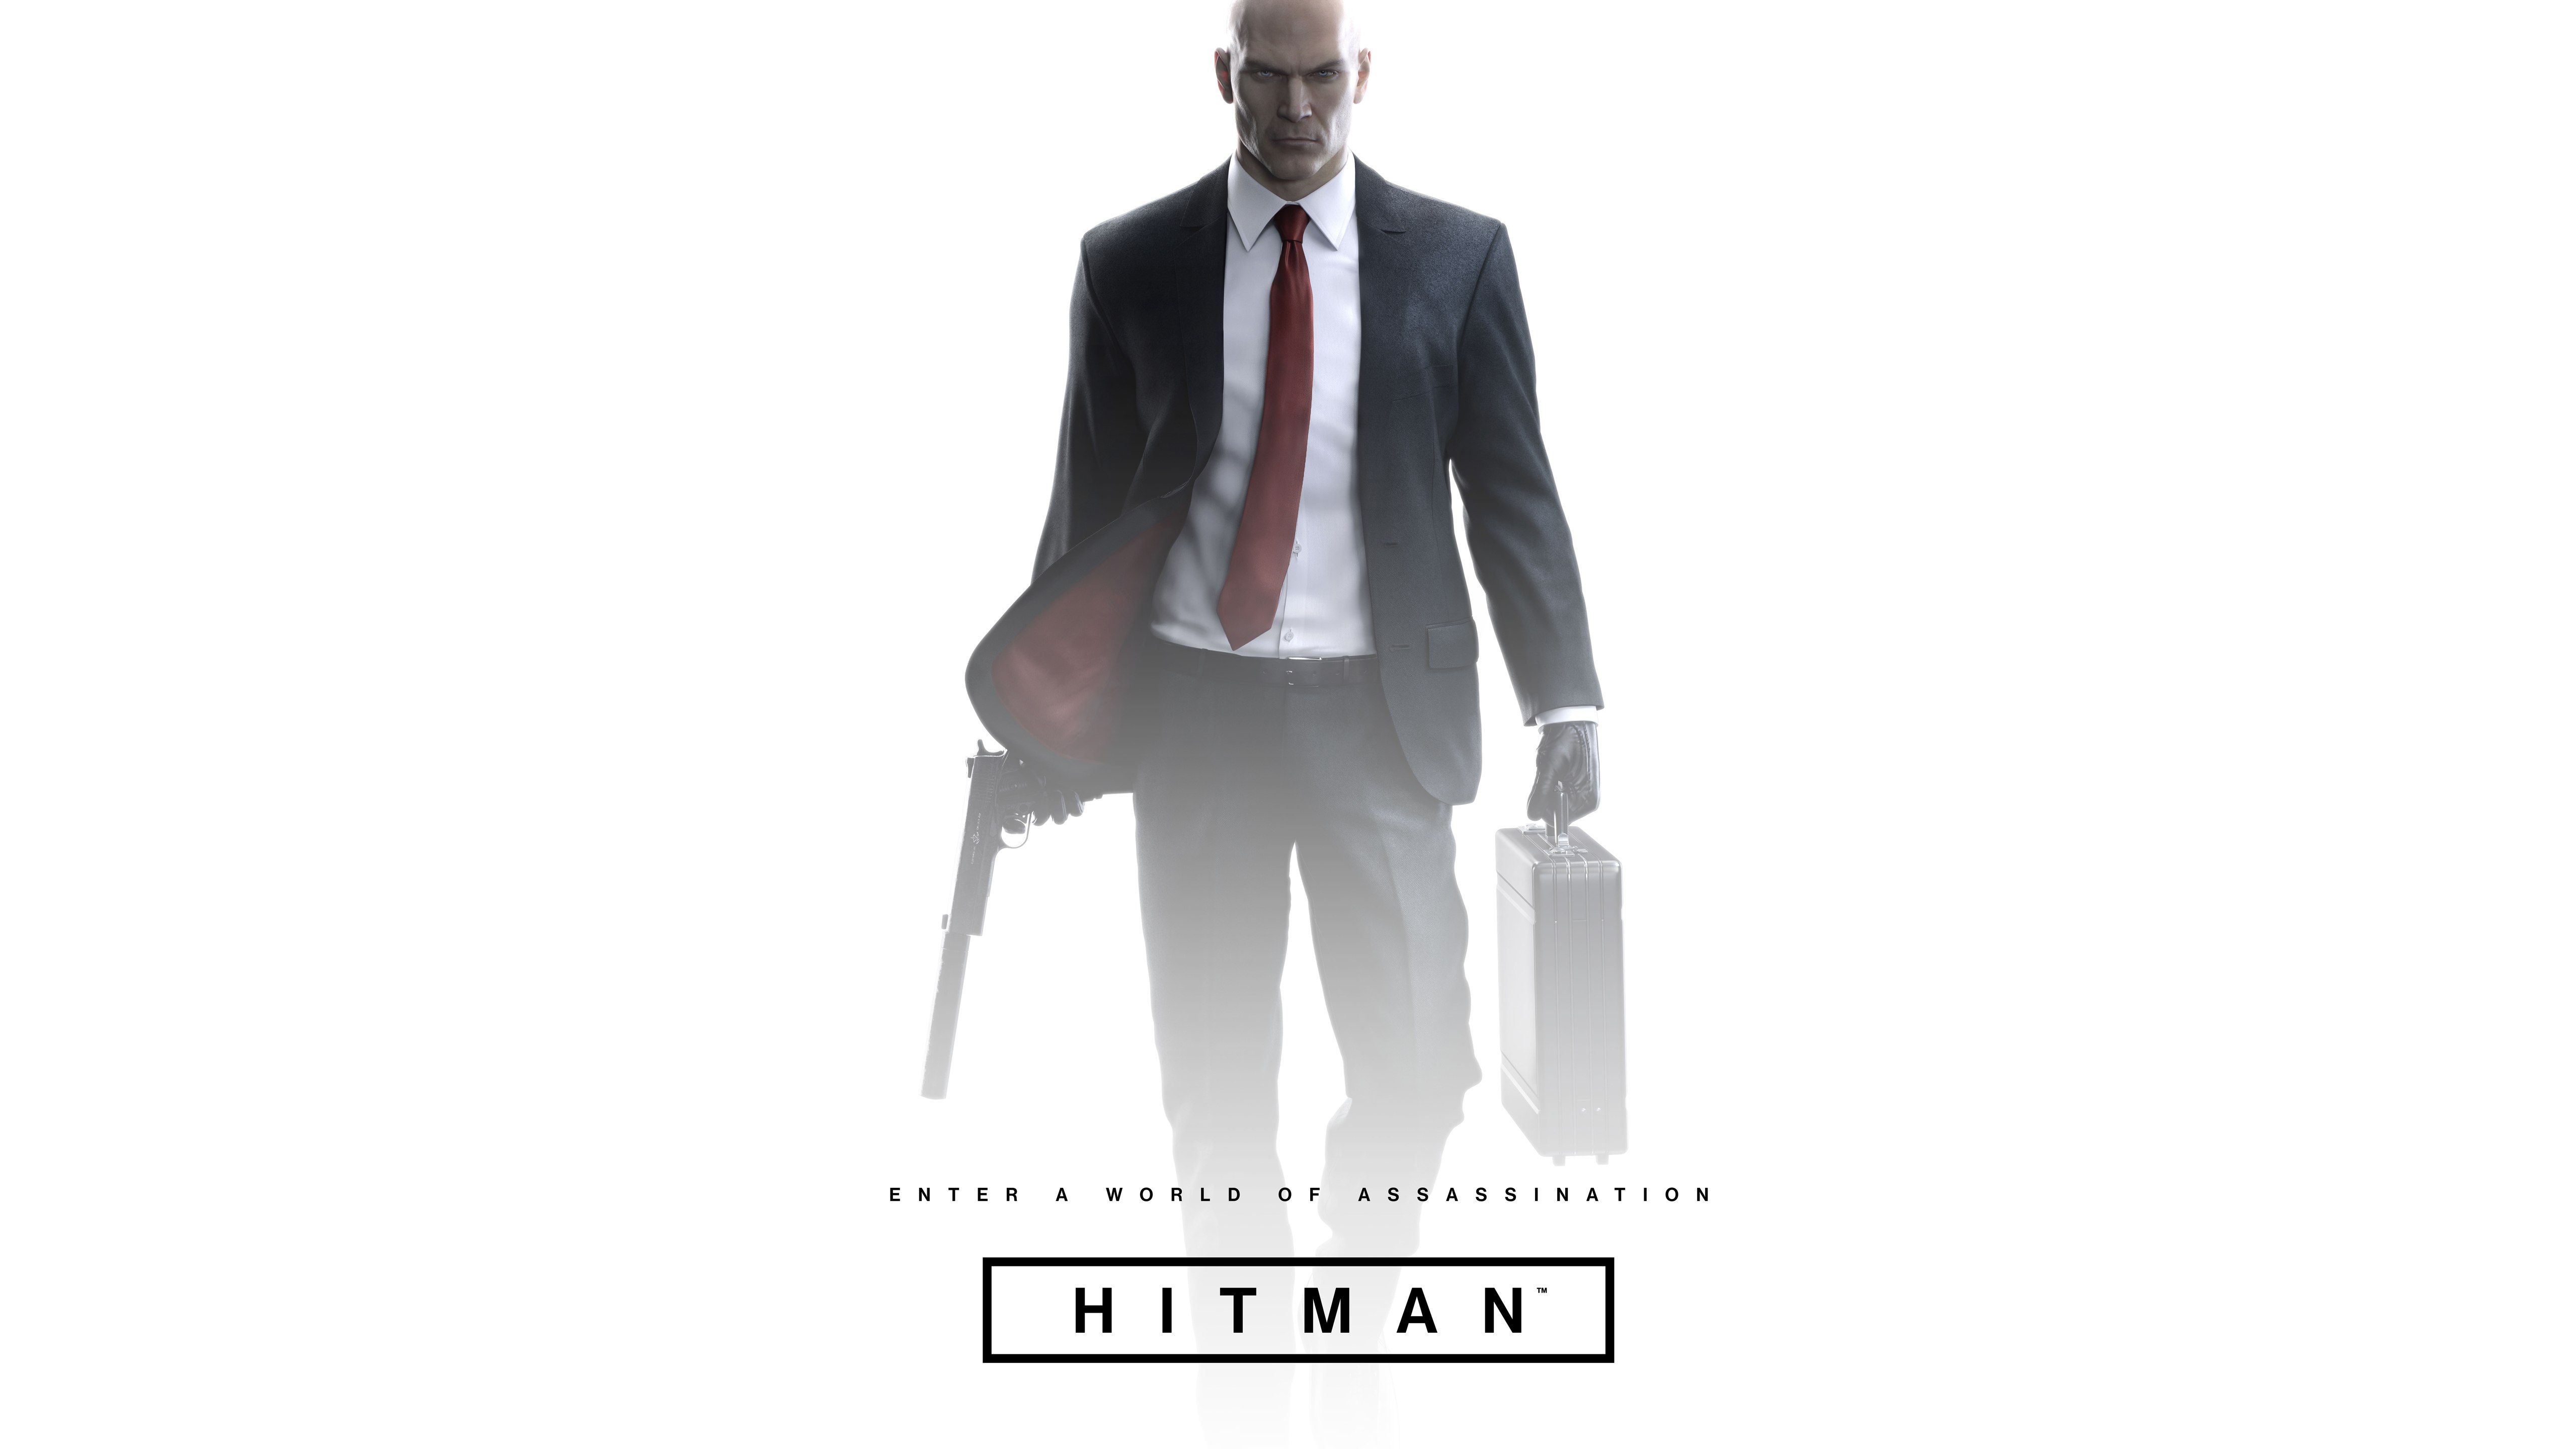 17 Hitman (2016) HD Wallpapers | Backgrounds - Wallpaper Abyss